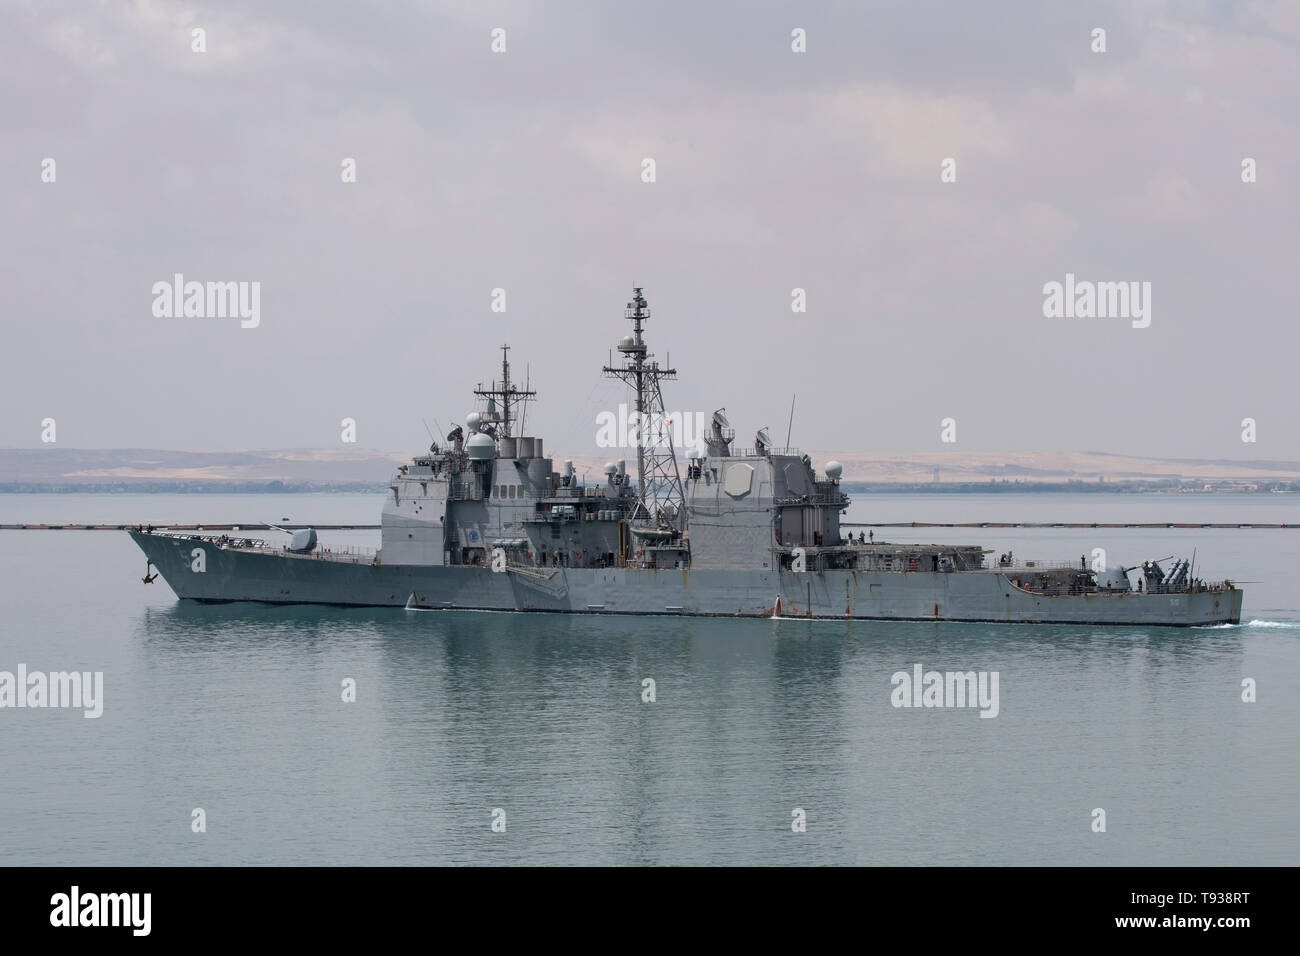 Egypt, Suez Canal. US military ships transiting the Suez Canal May 9, 2019. Ticonderoga-class guided-missile cruiser USS Leyte Gulf (CG 55). Stock Photo